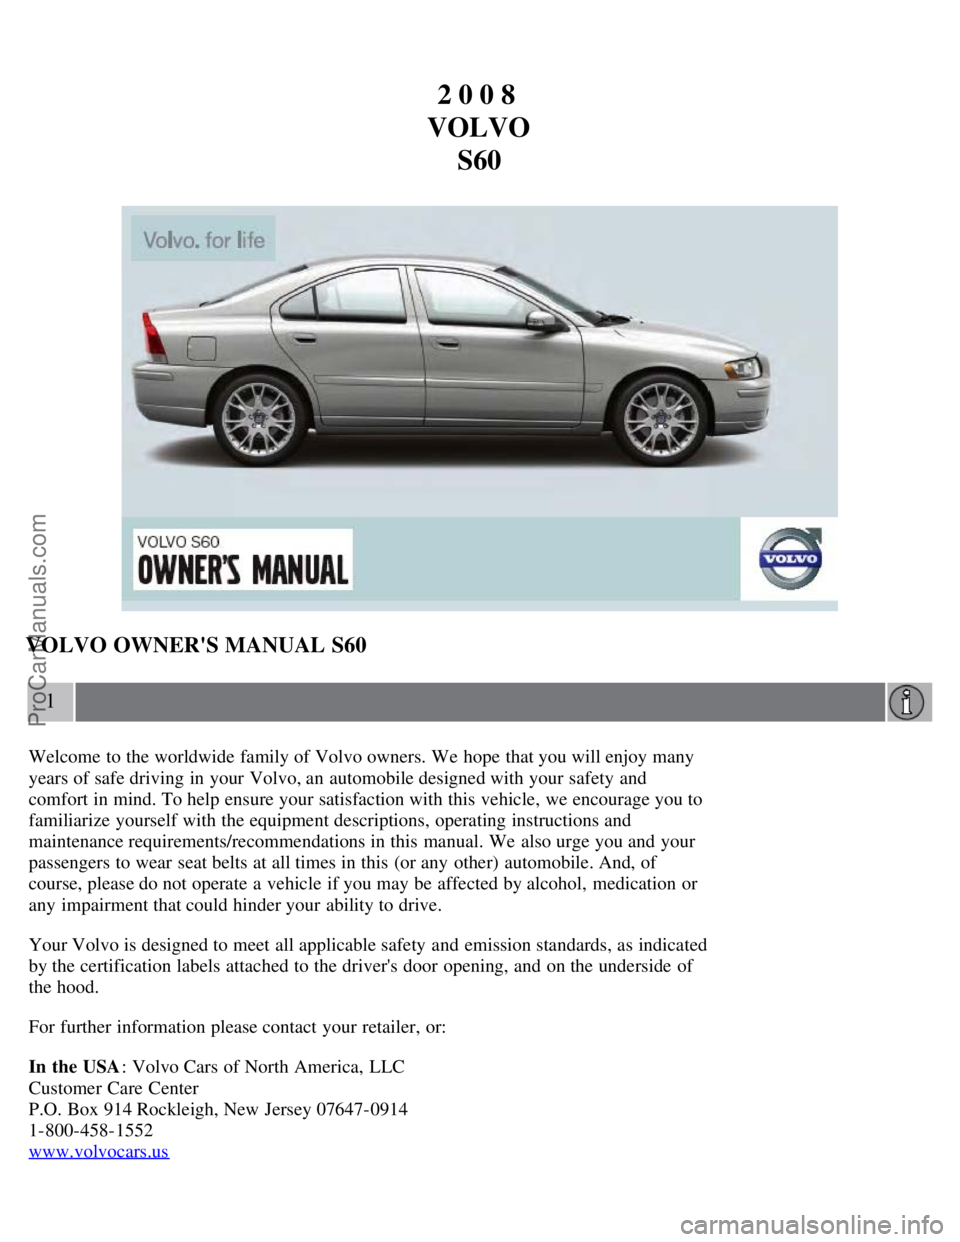 VOLVO S60 2008  Owners Manual 2 0 0 8 
VOLVO S60
VOLVO OWNERS MANUAL S60
1
Welcome to the worldwide family of Volvo owners. We hope  that you will enjoy many
years of safe driving in your Volvo, an  automobile designed with your 